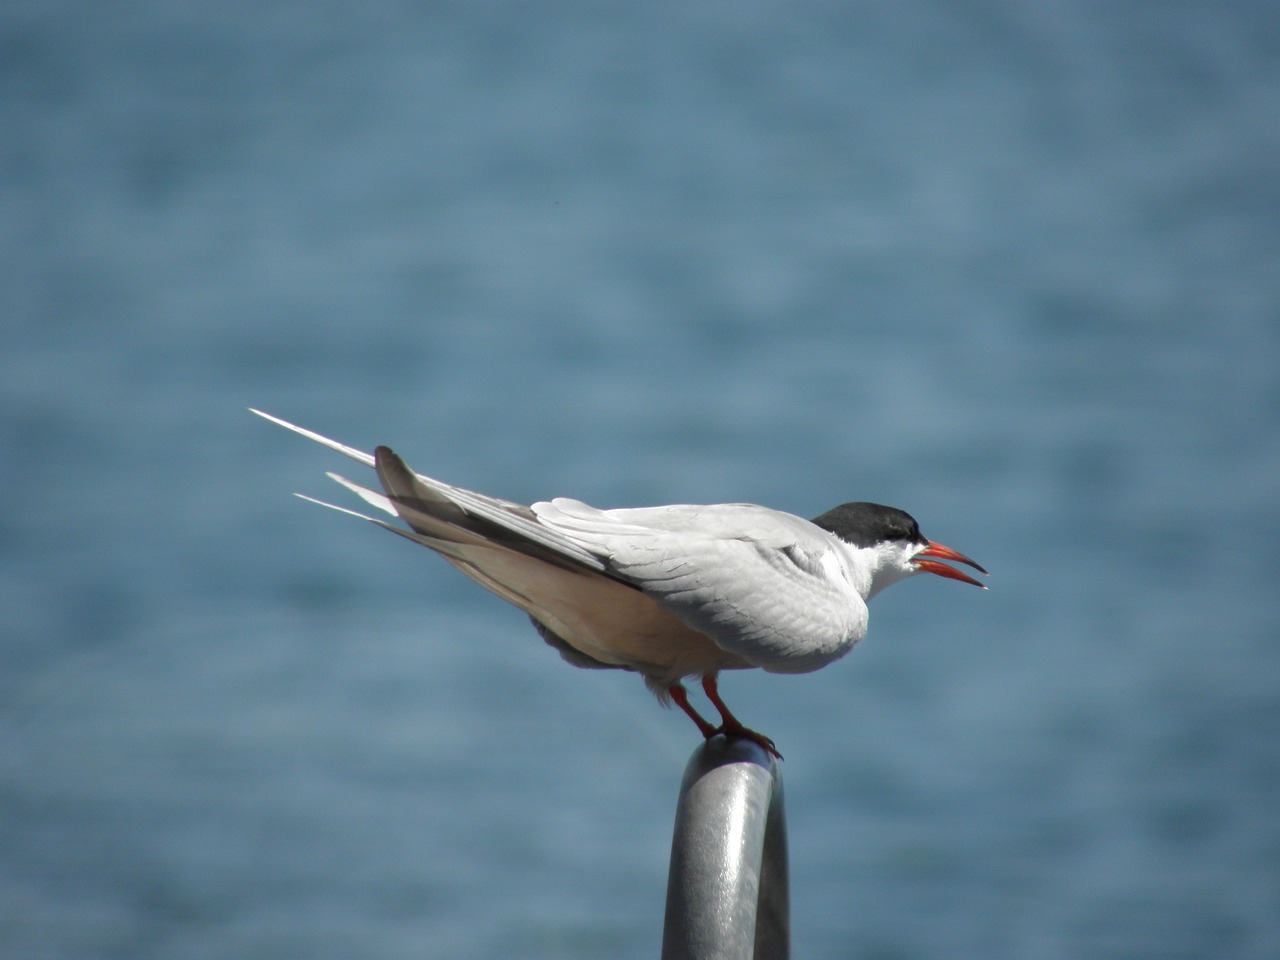 a bird sitting on top of a metal pole, by Robert Brackman, flickr, arabesque, red-eyed, white neck visible, on the bow, stern look